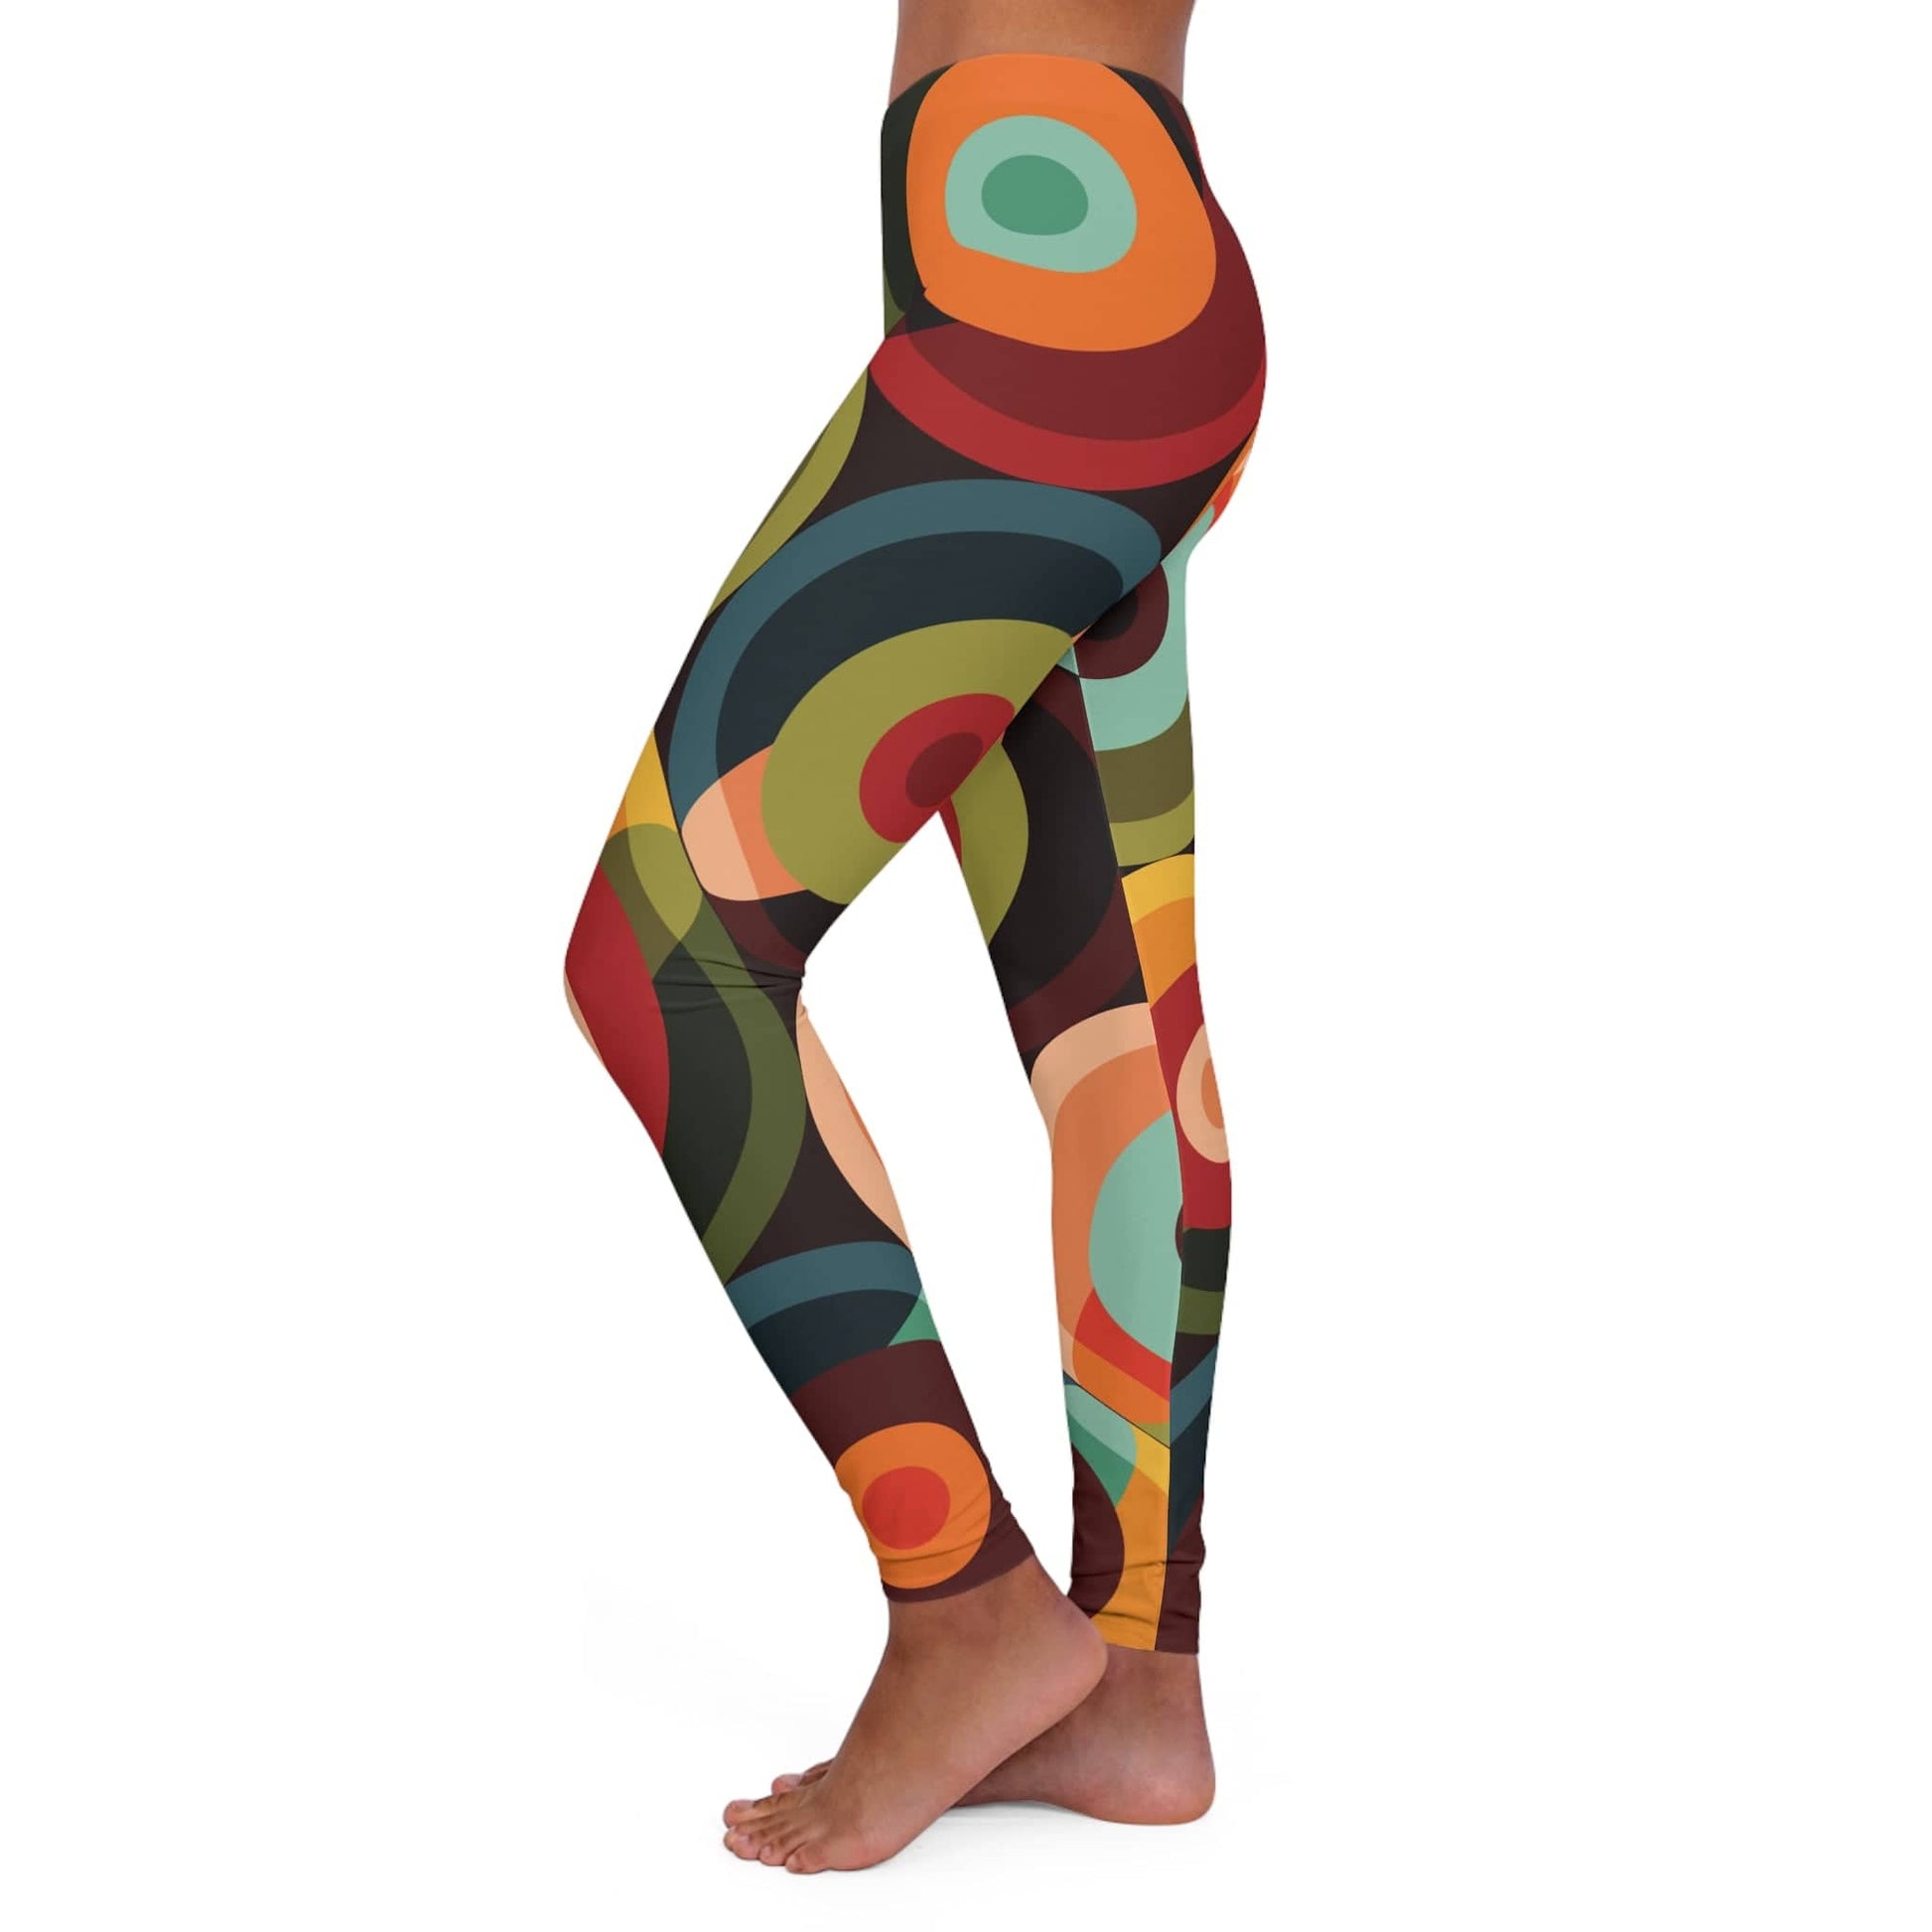 Kate McEnroe New York 70s Groovy Hippie Psychedelic Orbs Leggings, Mid Century Modern Retro Abstract Casual Yoga Pants, Geometric Circles Workout Pants, Leggings